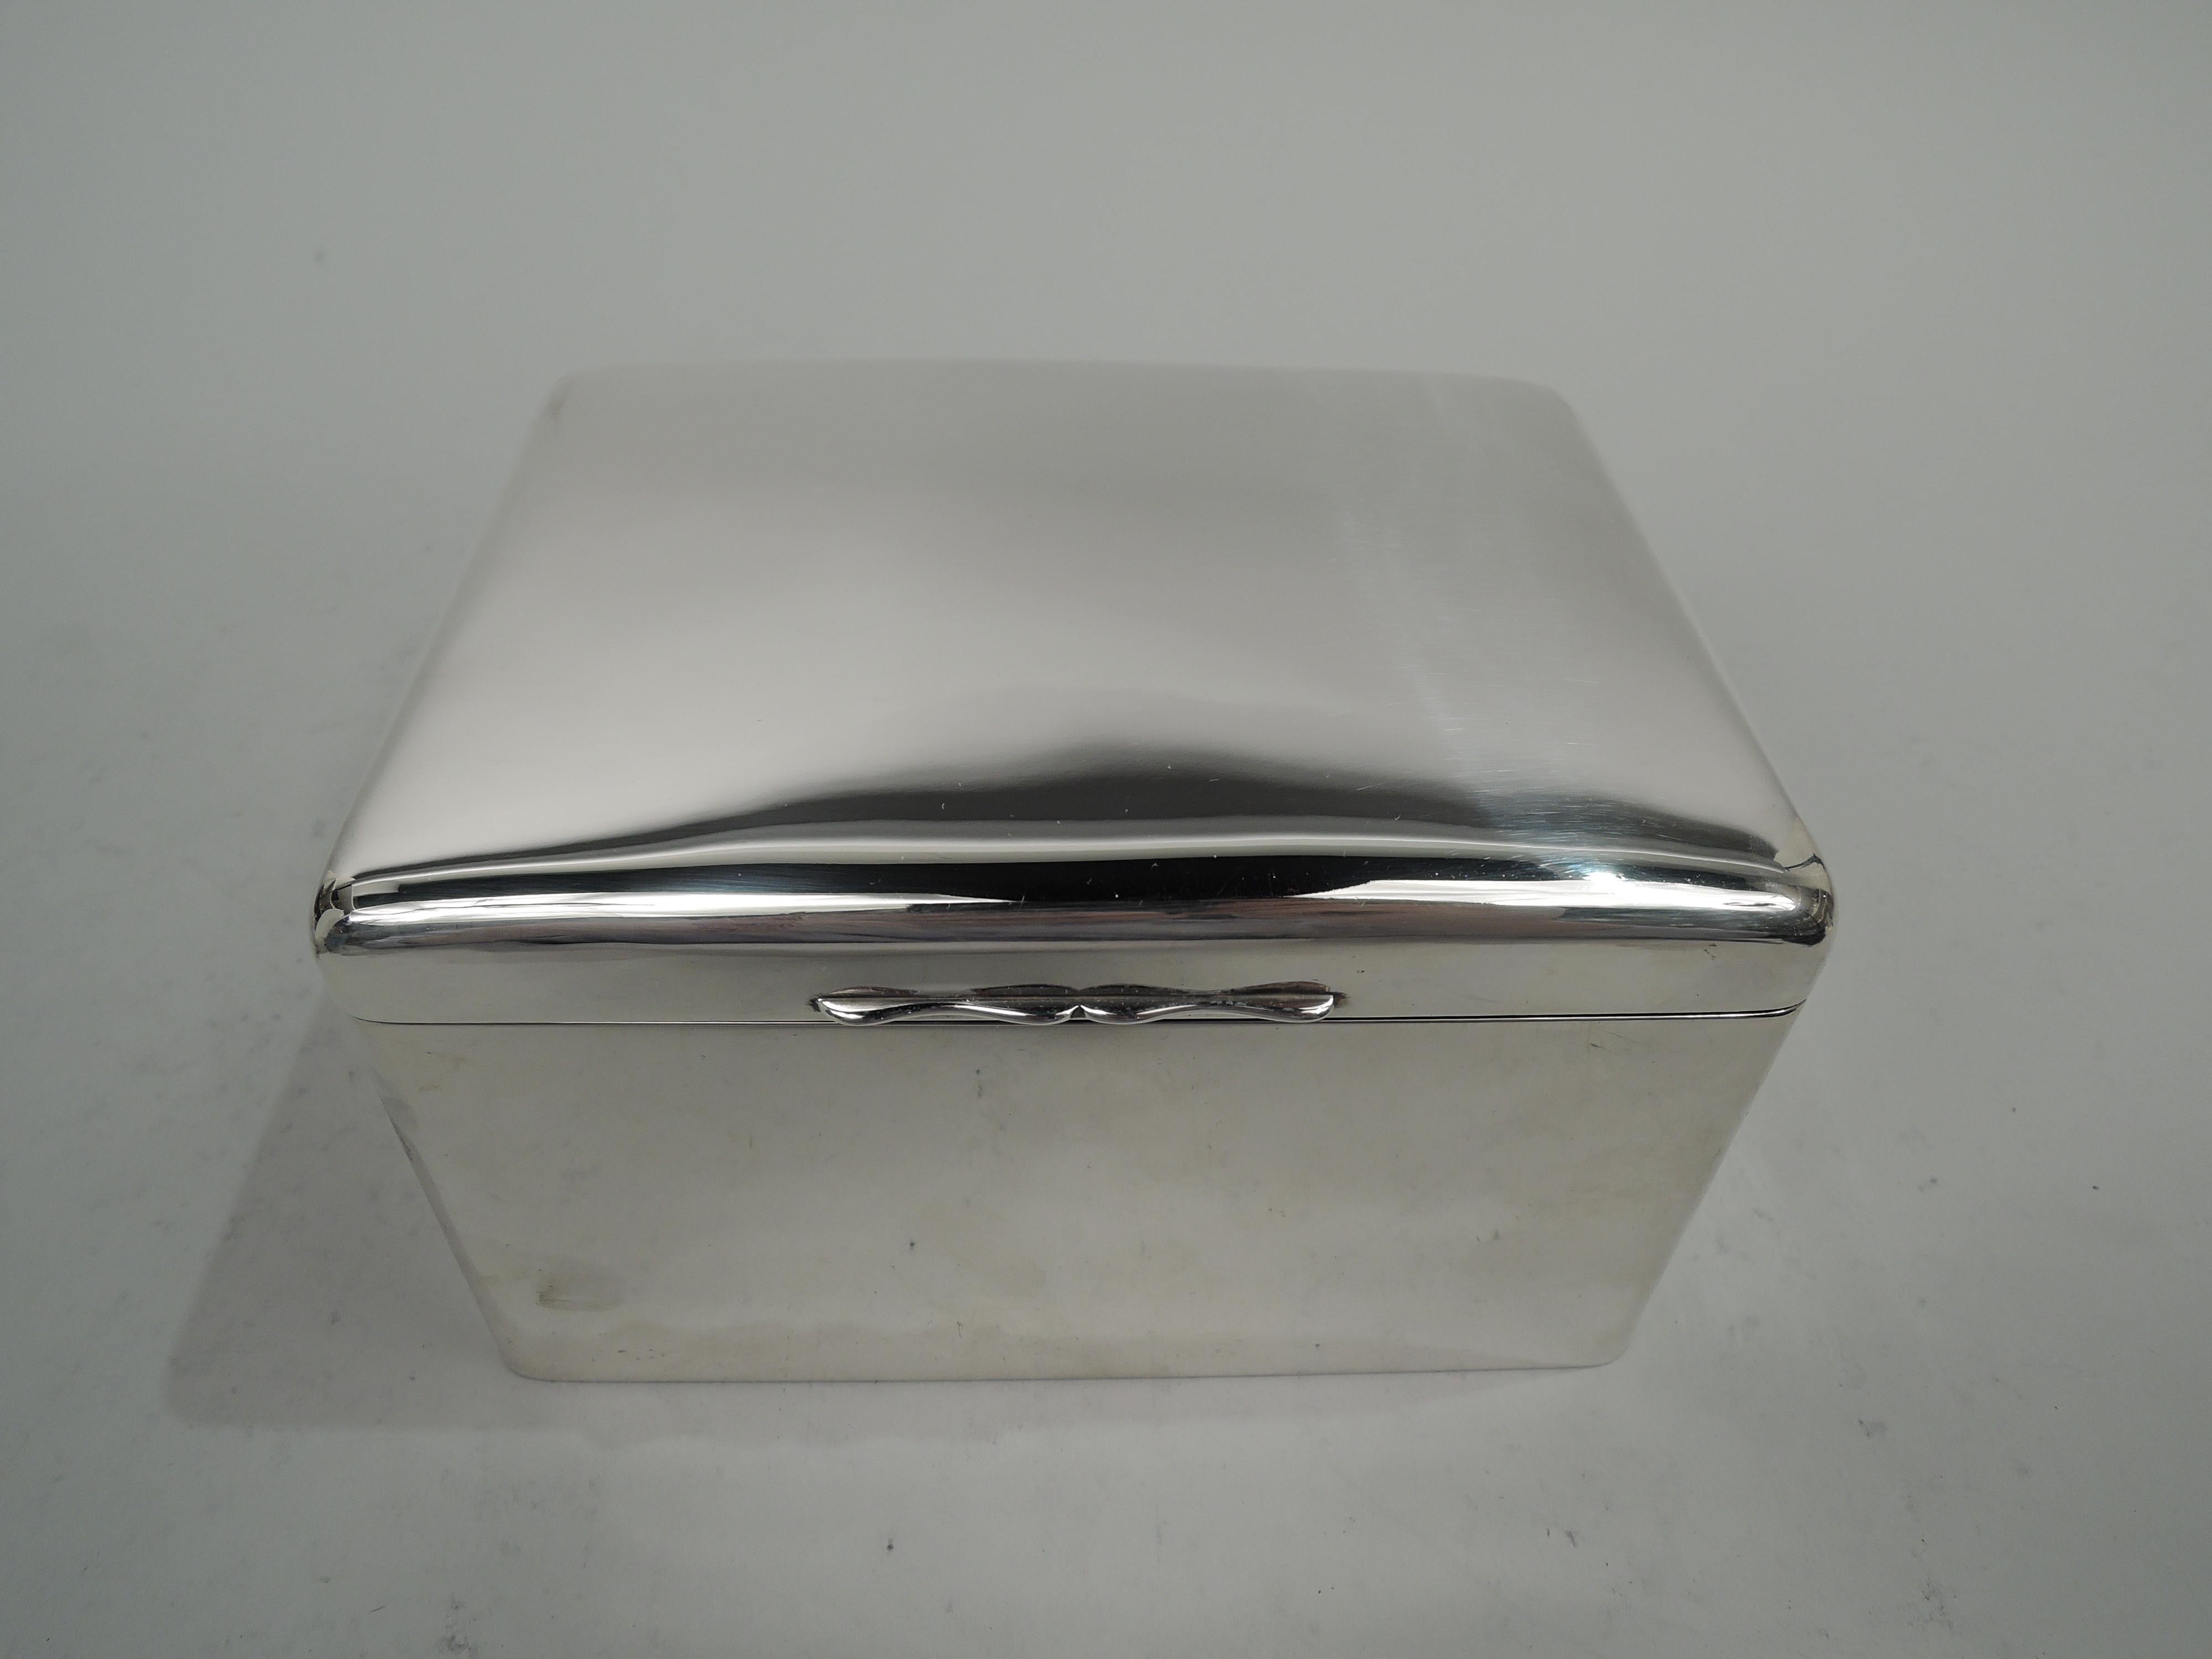 English Modern sterling silver box. Tall and rectangular with curved corners. Cover hinged with gently curved top and double-scroll tab. Box interior cedar-lined with open leather-lined bottom. Cover interior gilt. Worn marks including maker’s stamp